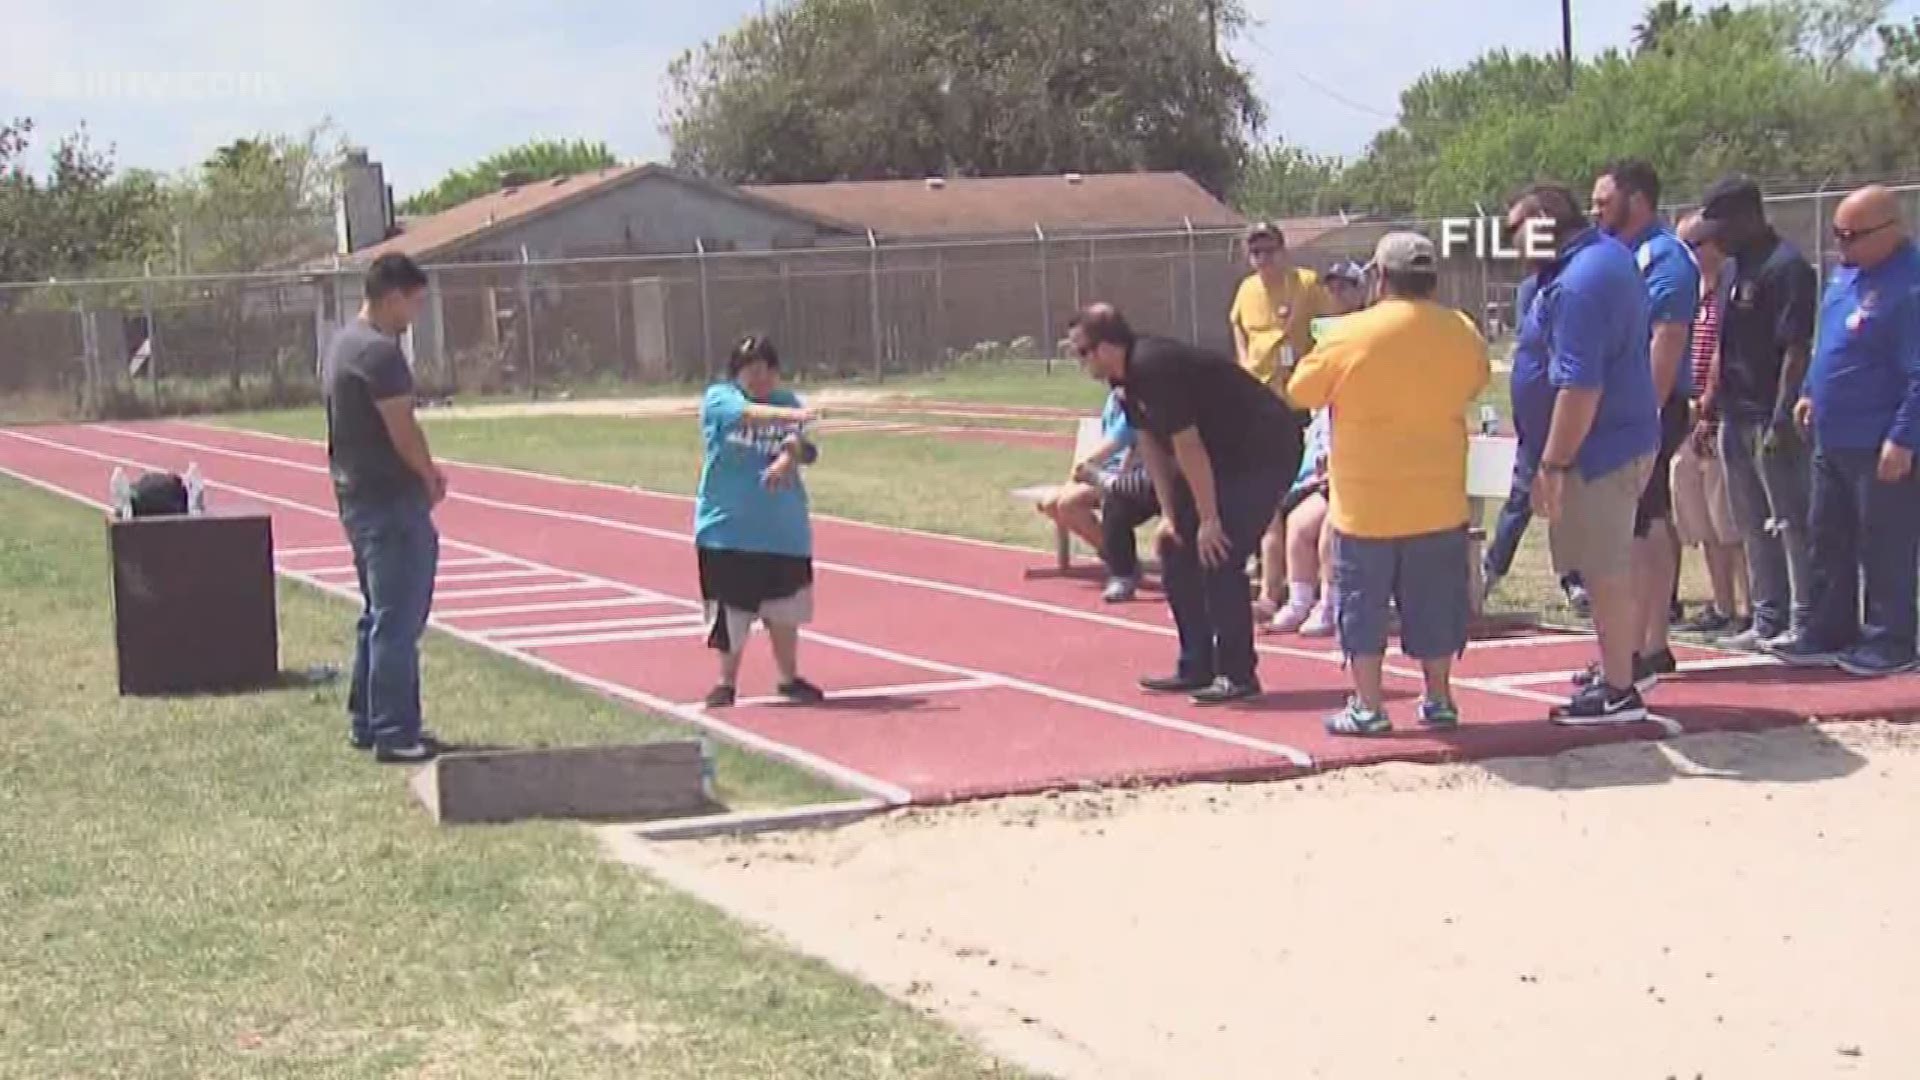 CITGO and the organizers of Special Olympics Texas announced Wednesday the details of the 36th annual South Texas Area Spring Games.